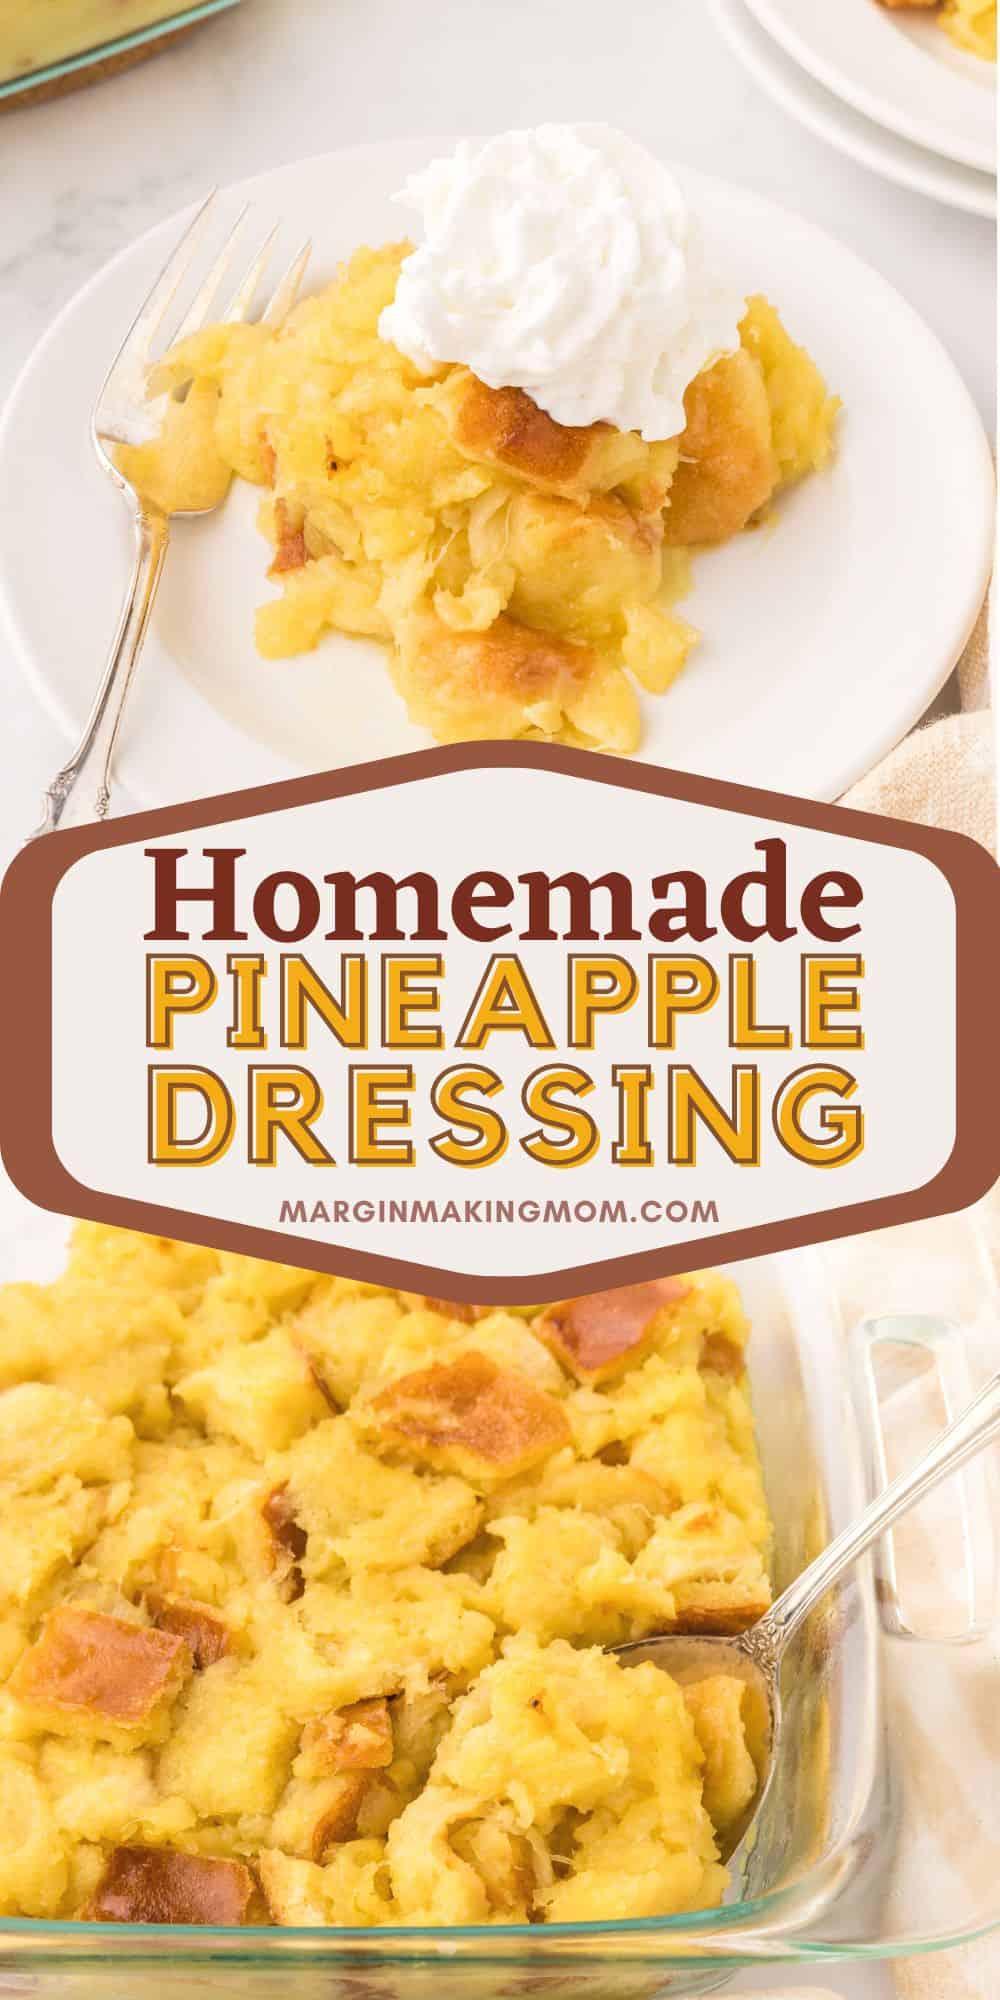 two photos; one shows a baking dish of pineapple dressing, the other shows the pineapple stuffing scooped onto a plate and served with whipped cream as a sweet side dish or dessert.